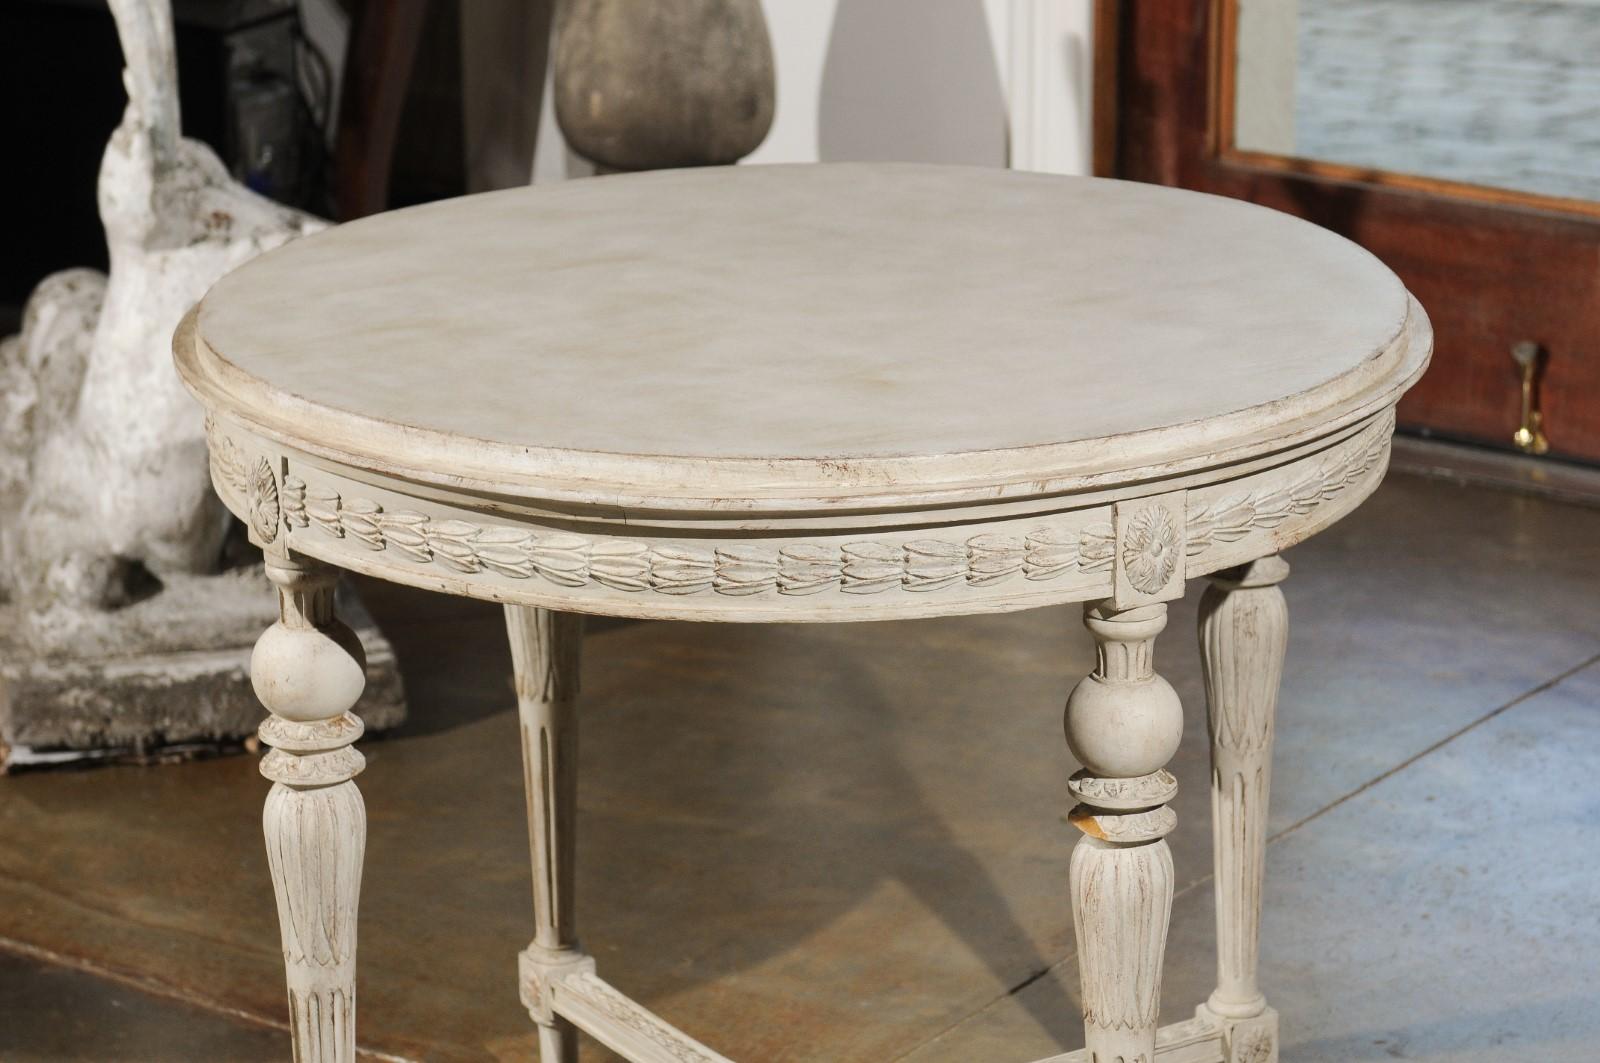 19th Century Swedish Gustavian Style Painted Wood Round Table with Carved Apron and Legs